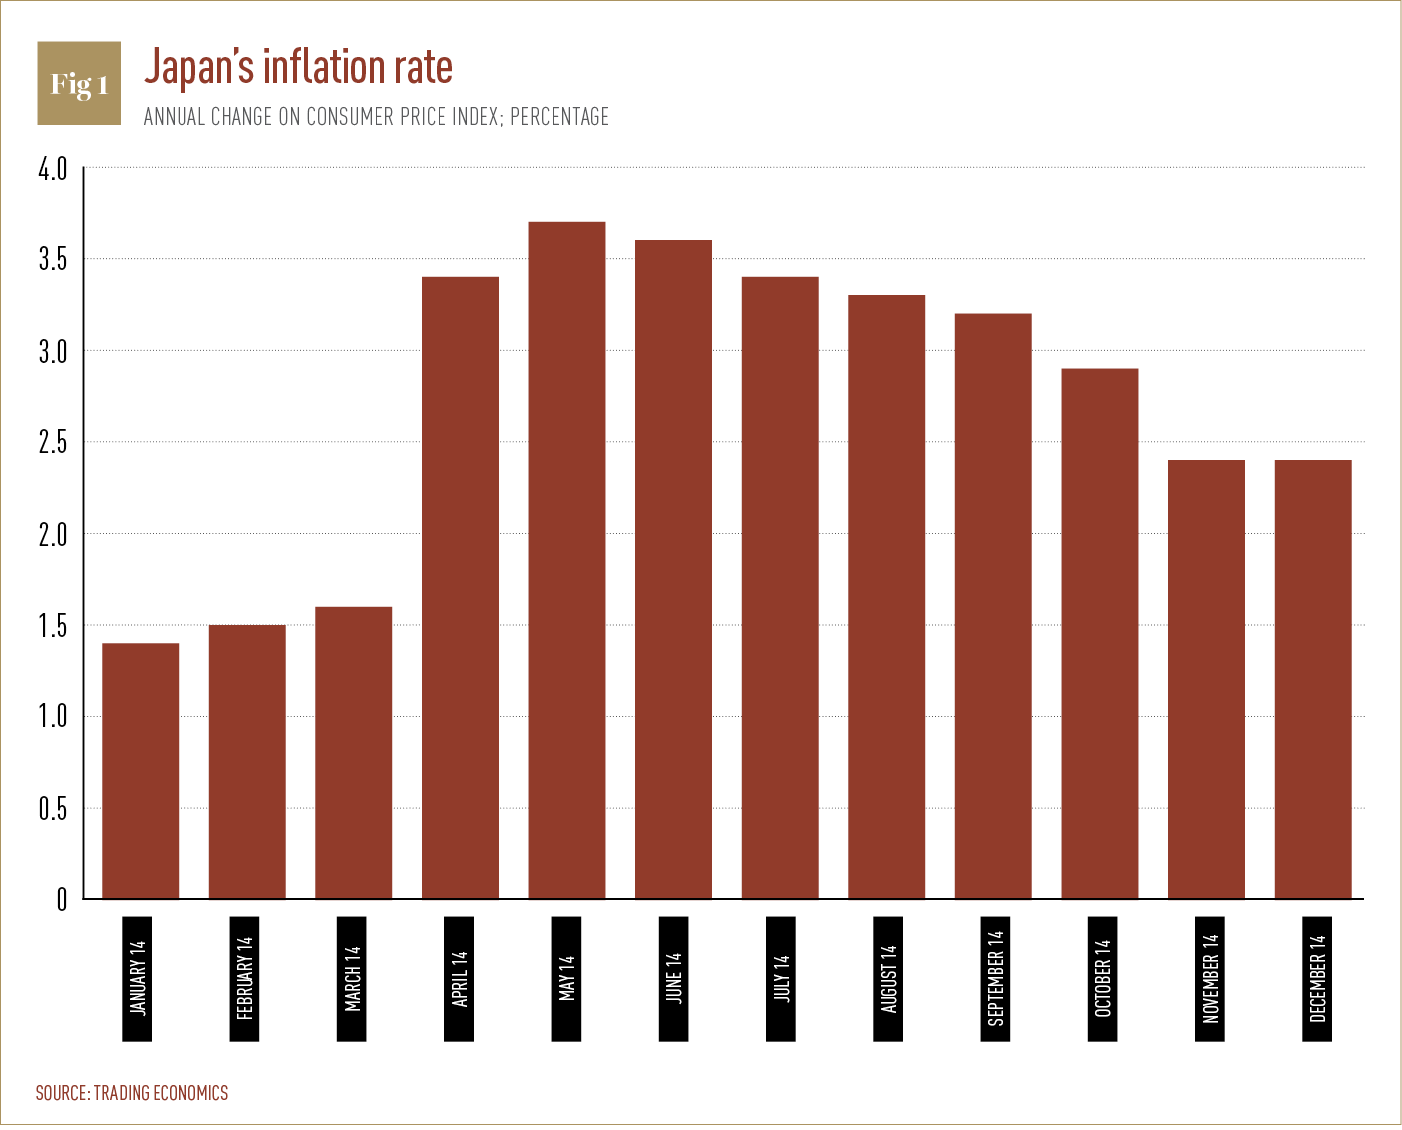 Japan's inflation rate